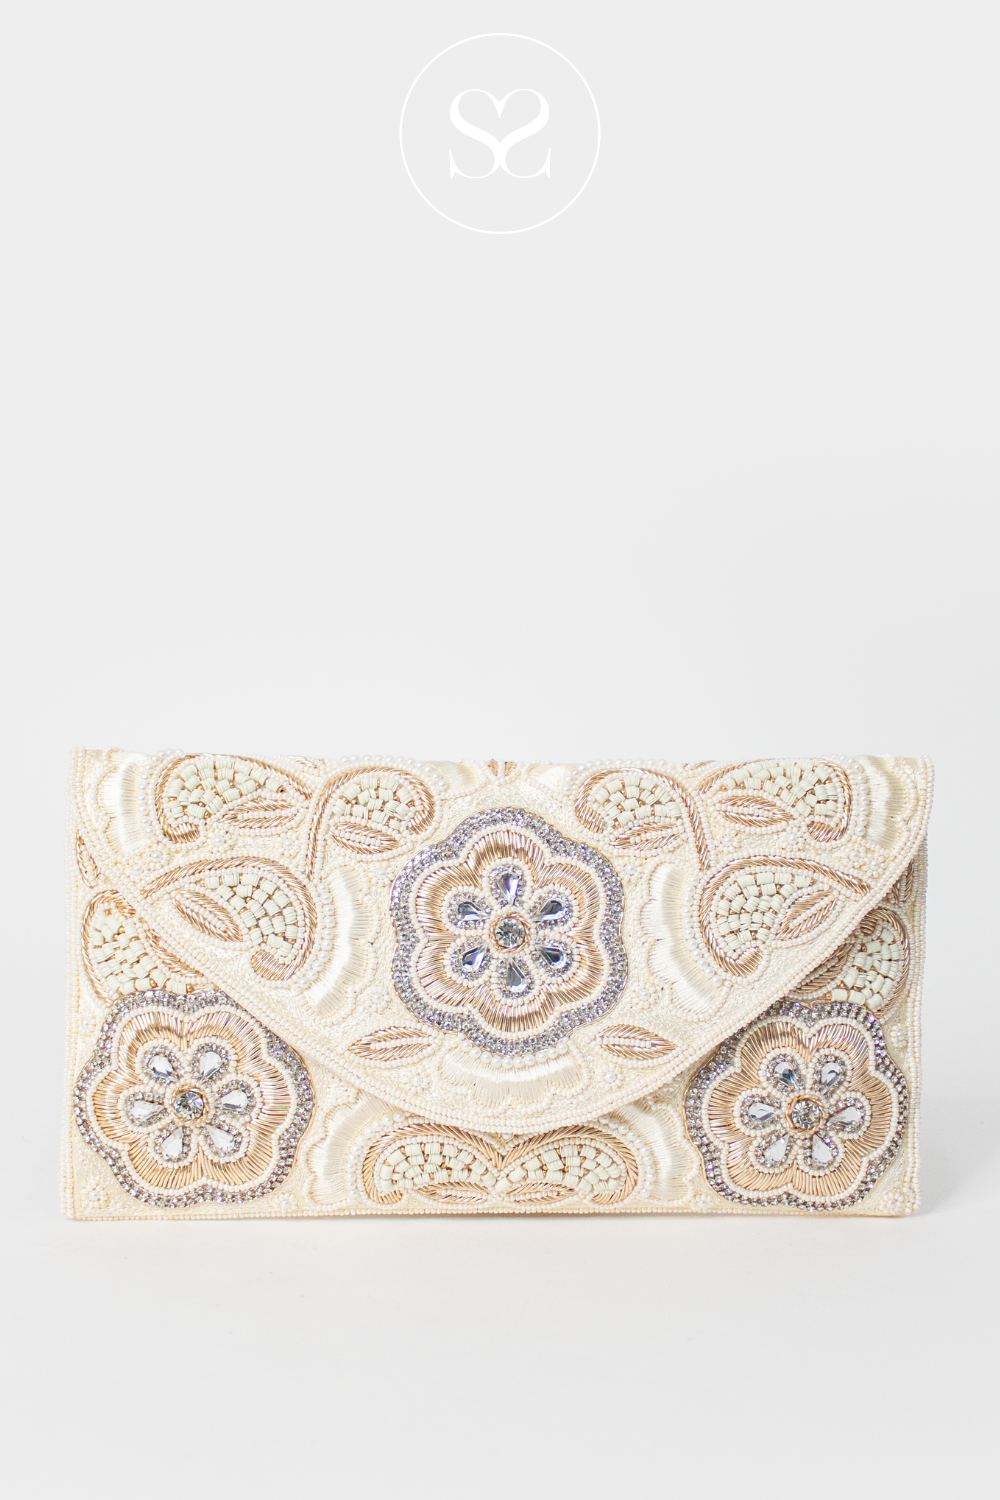 SHENEIL BEADED EMBELLISHED CREAM AND GOLD ENVELOPE OCCASSION CLUTCH BAG